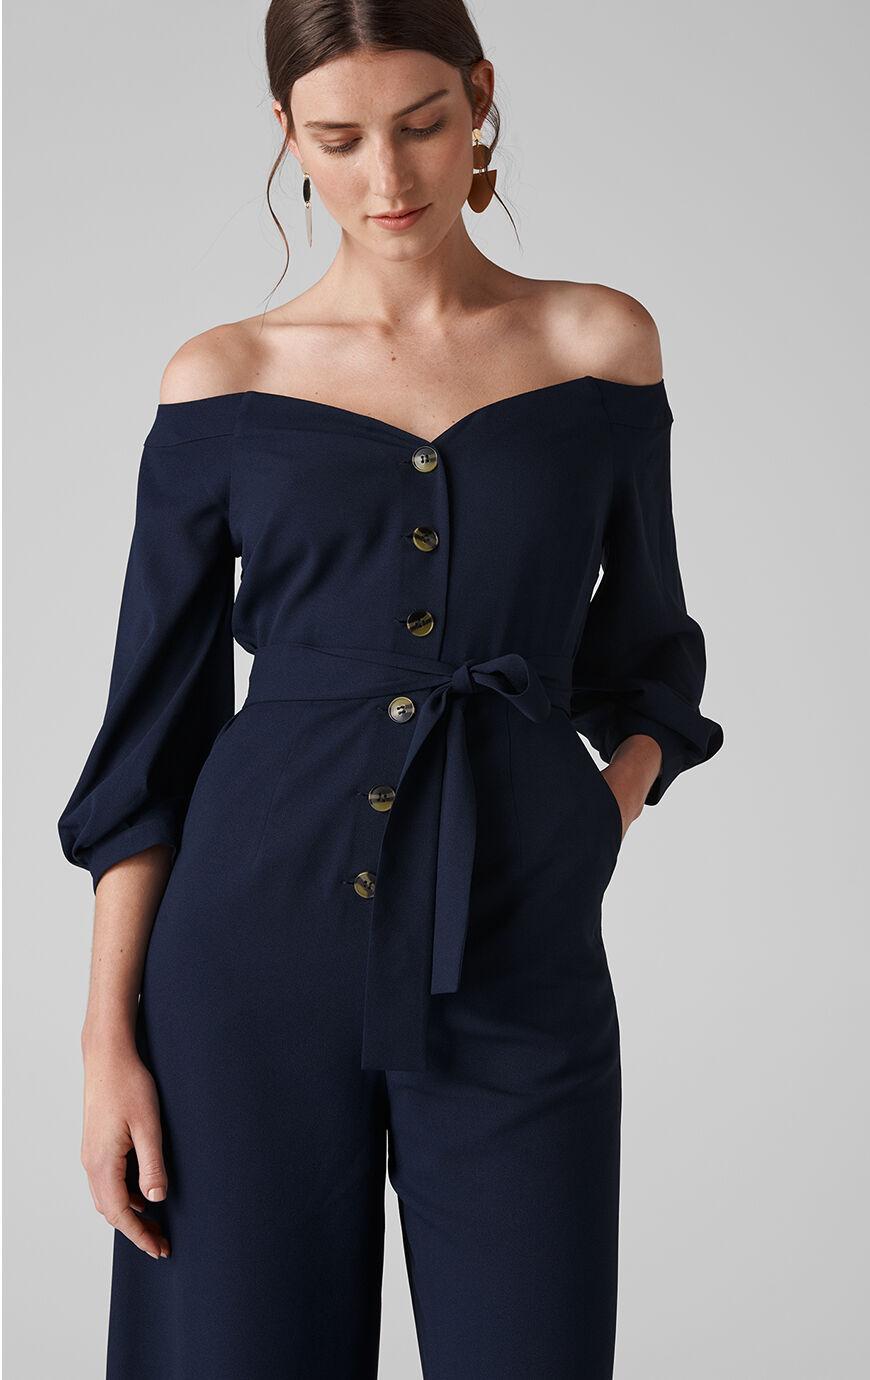 Whistles Synthetic Carina Off Shoulder Jumpsuit in Navy (Blue) - Lyst